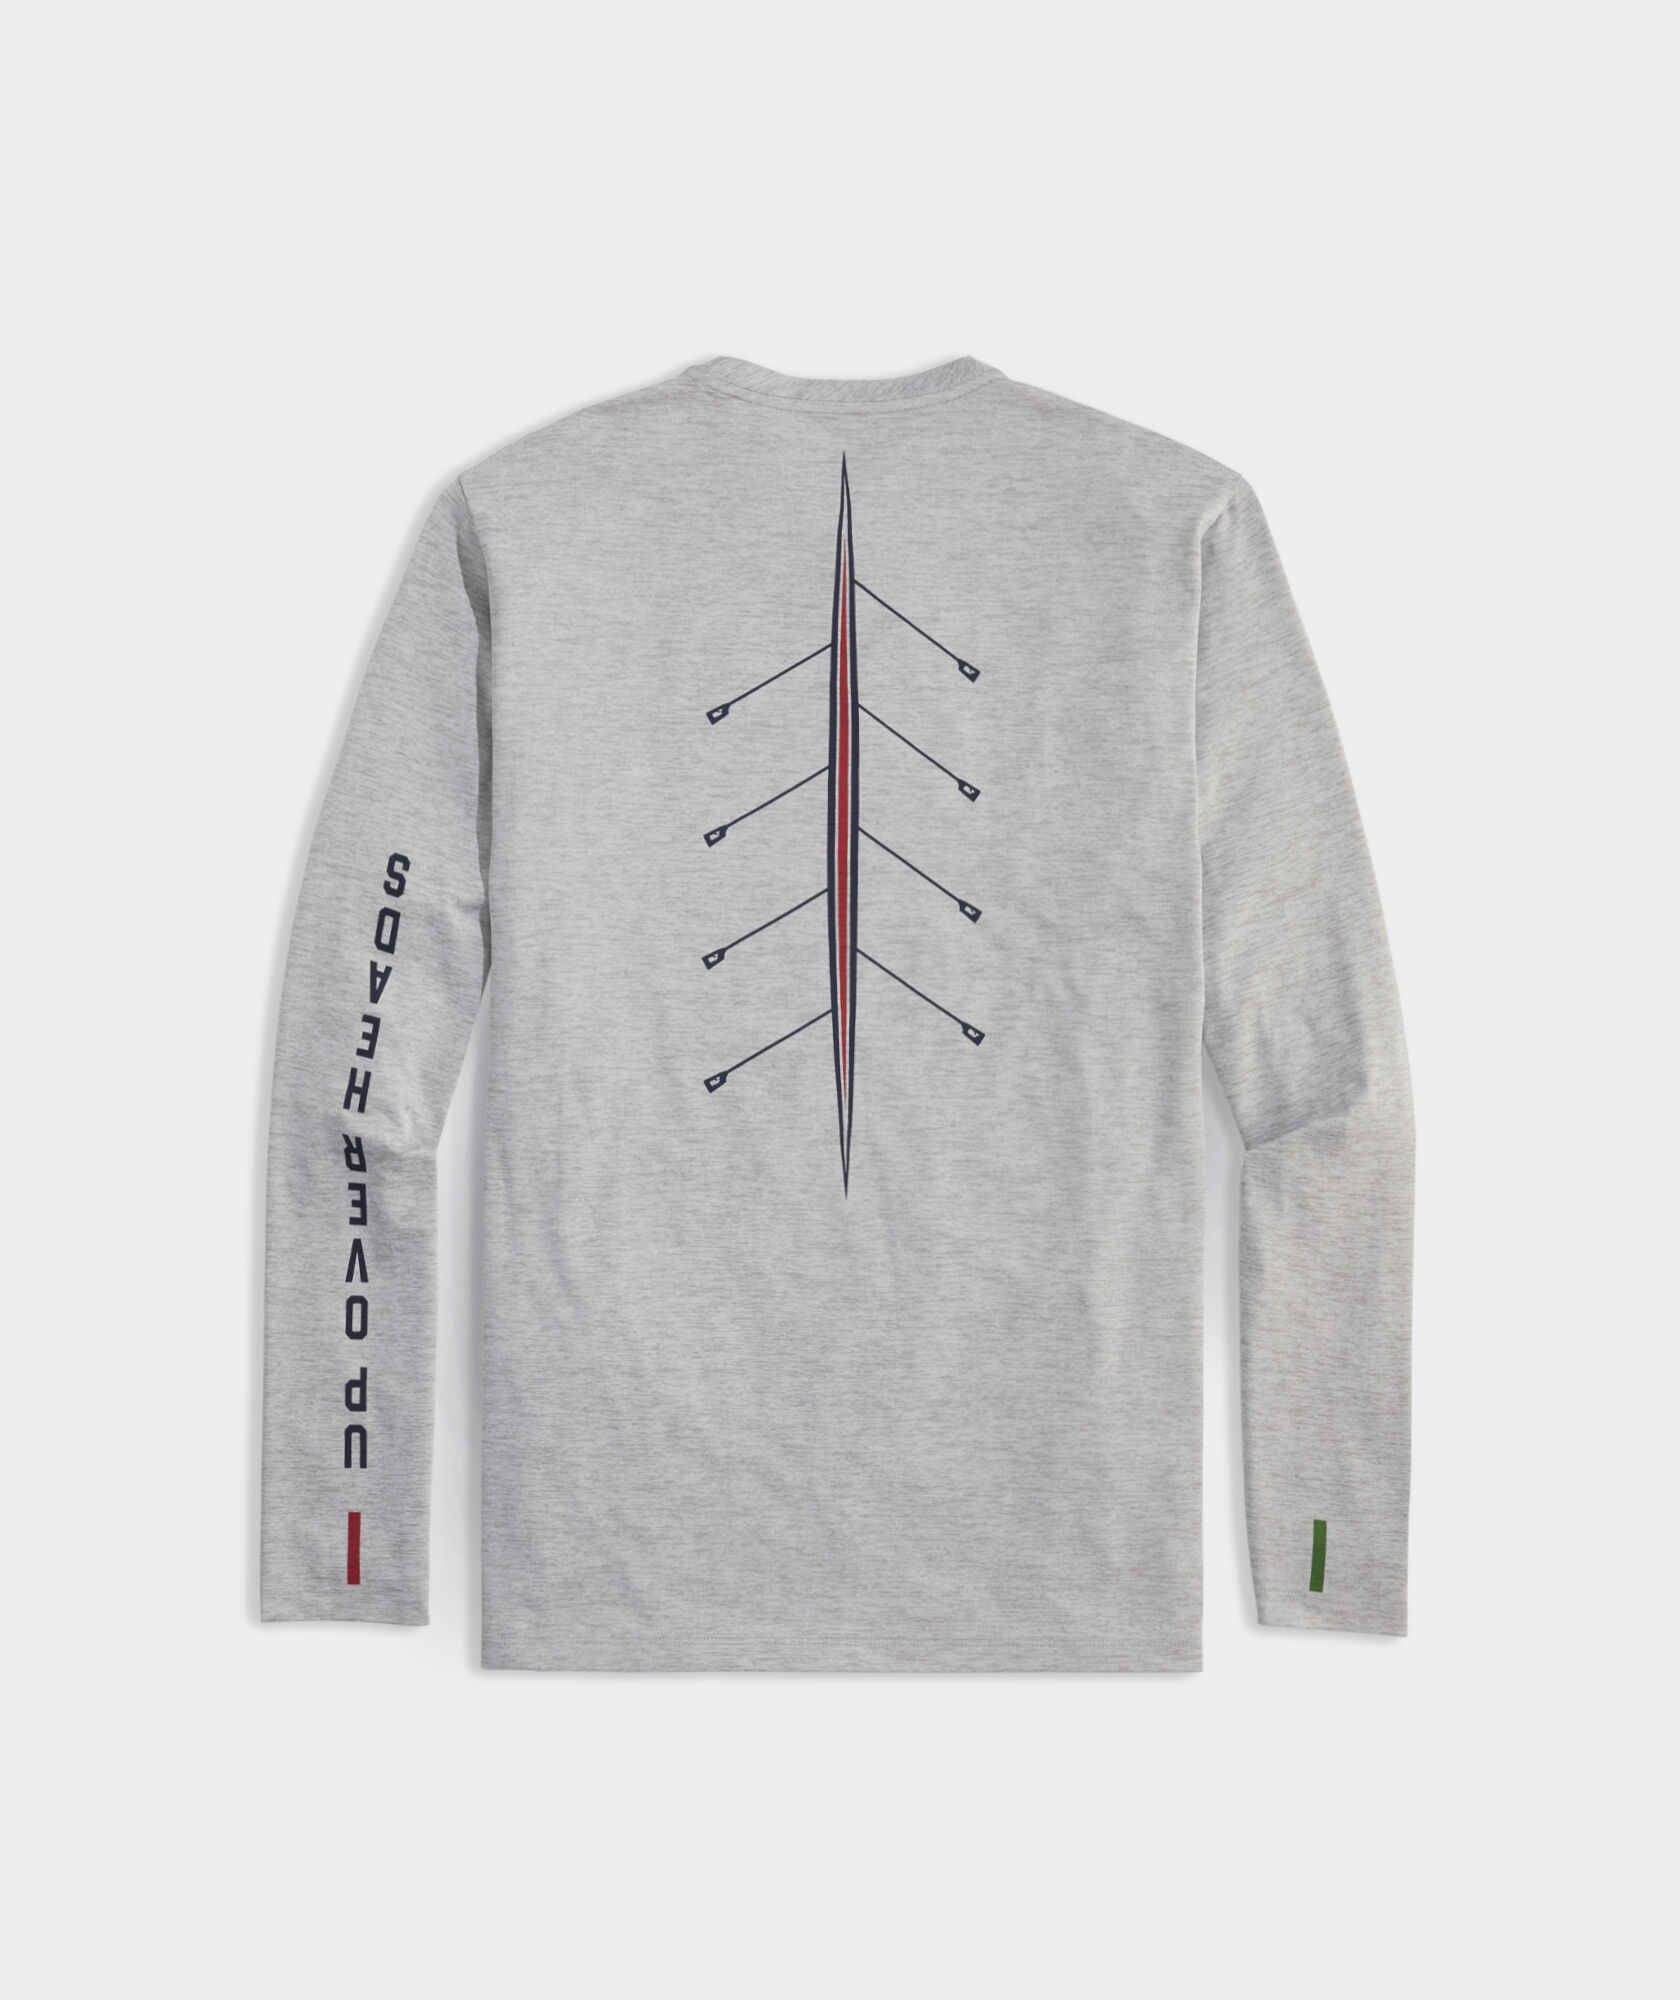 Limited-Edition Head Of The Charles® Sweep Boat Long-Sleeve Harbor Performance Tee